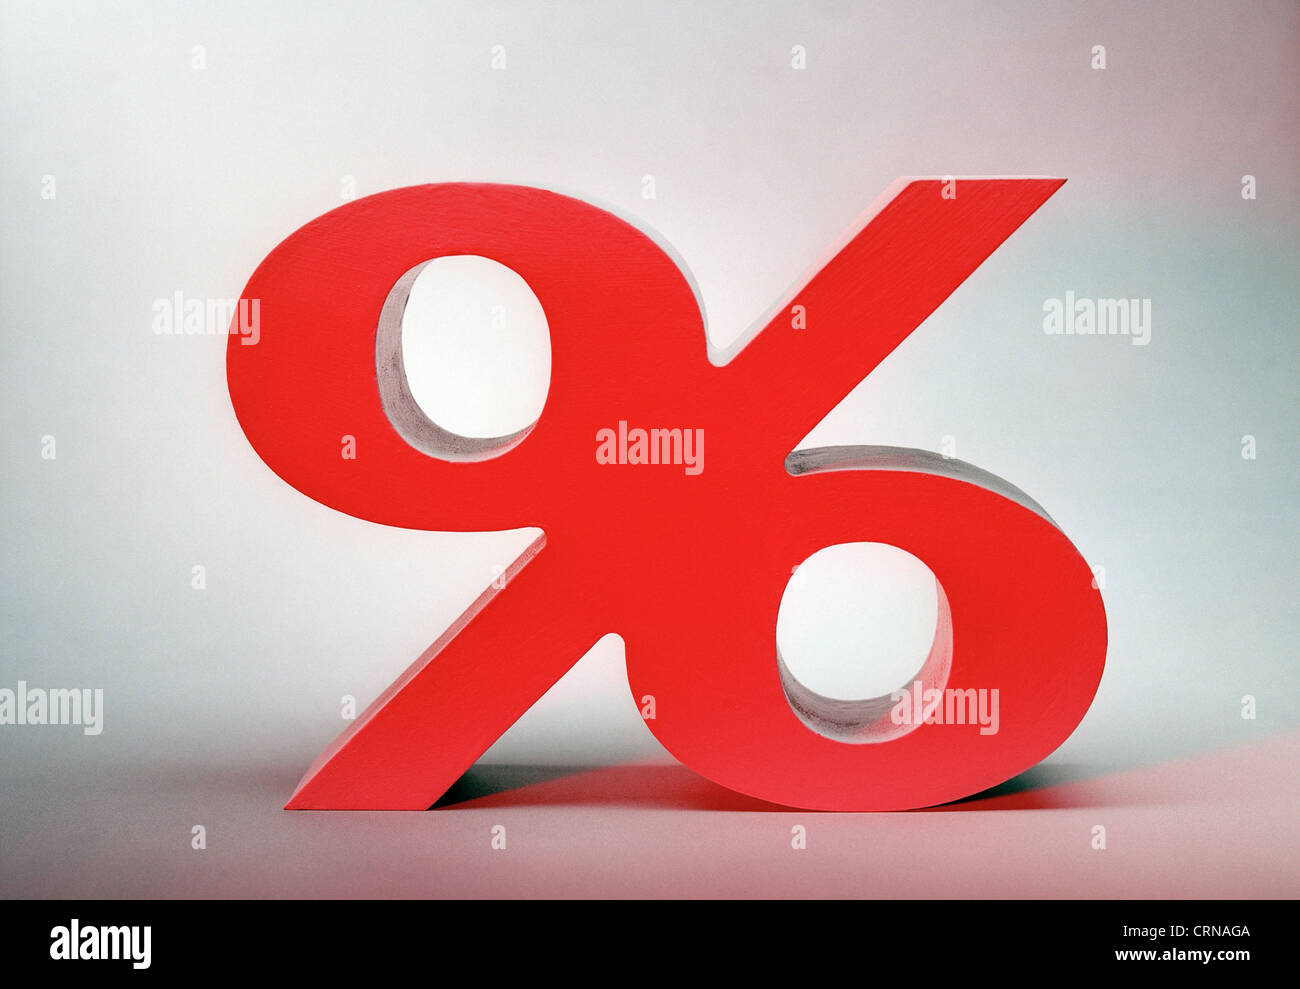 An illuminated red percent sign before a light background Stock Photo